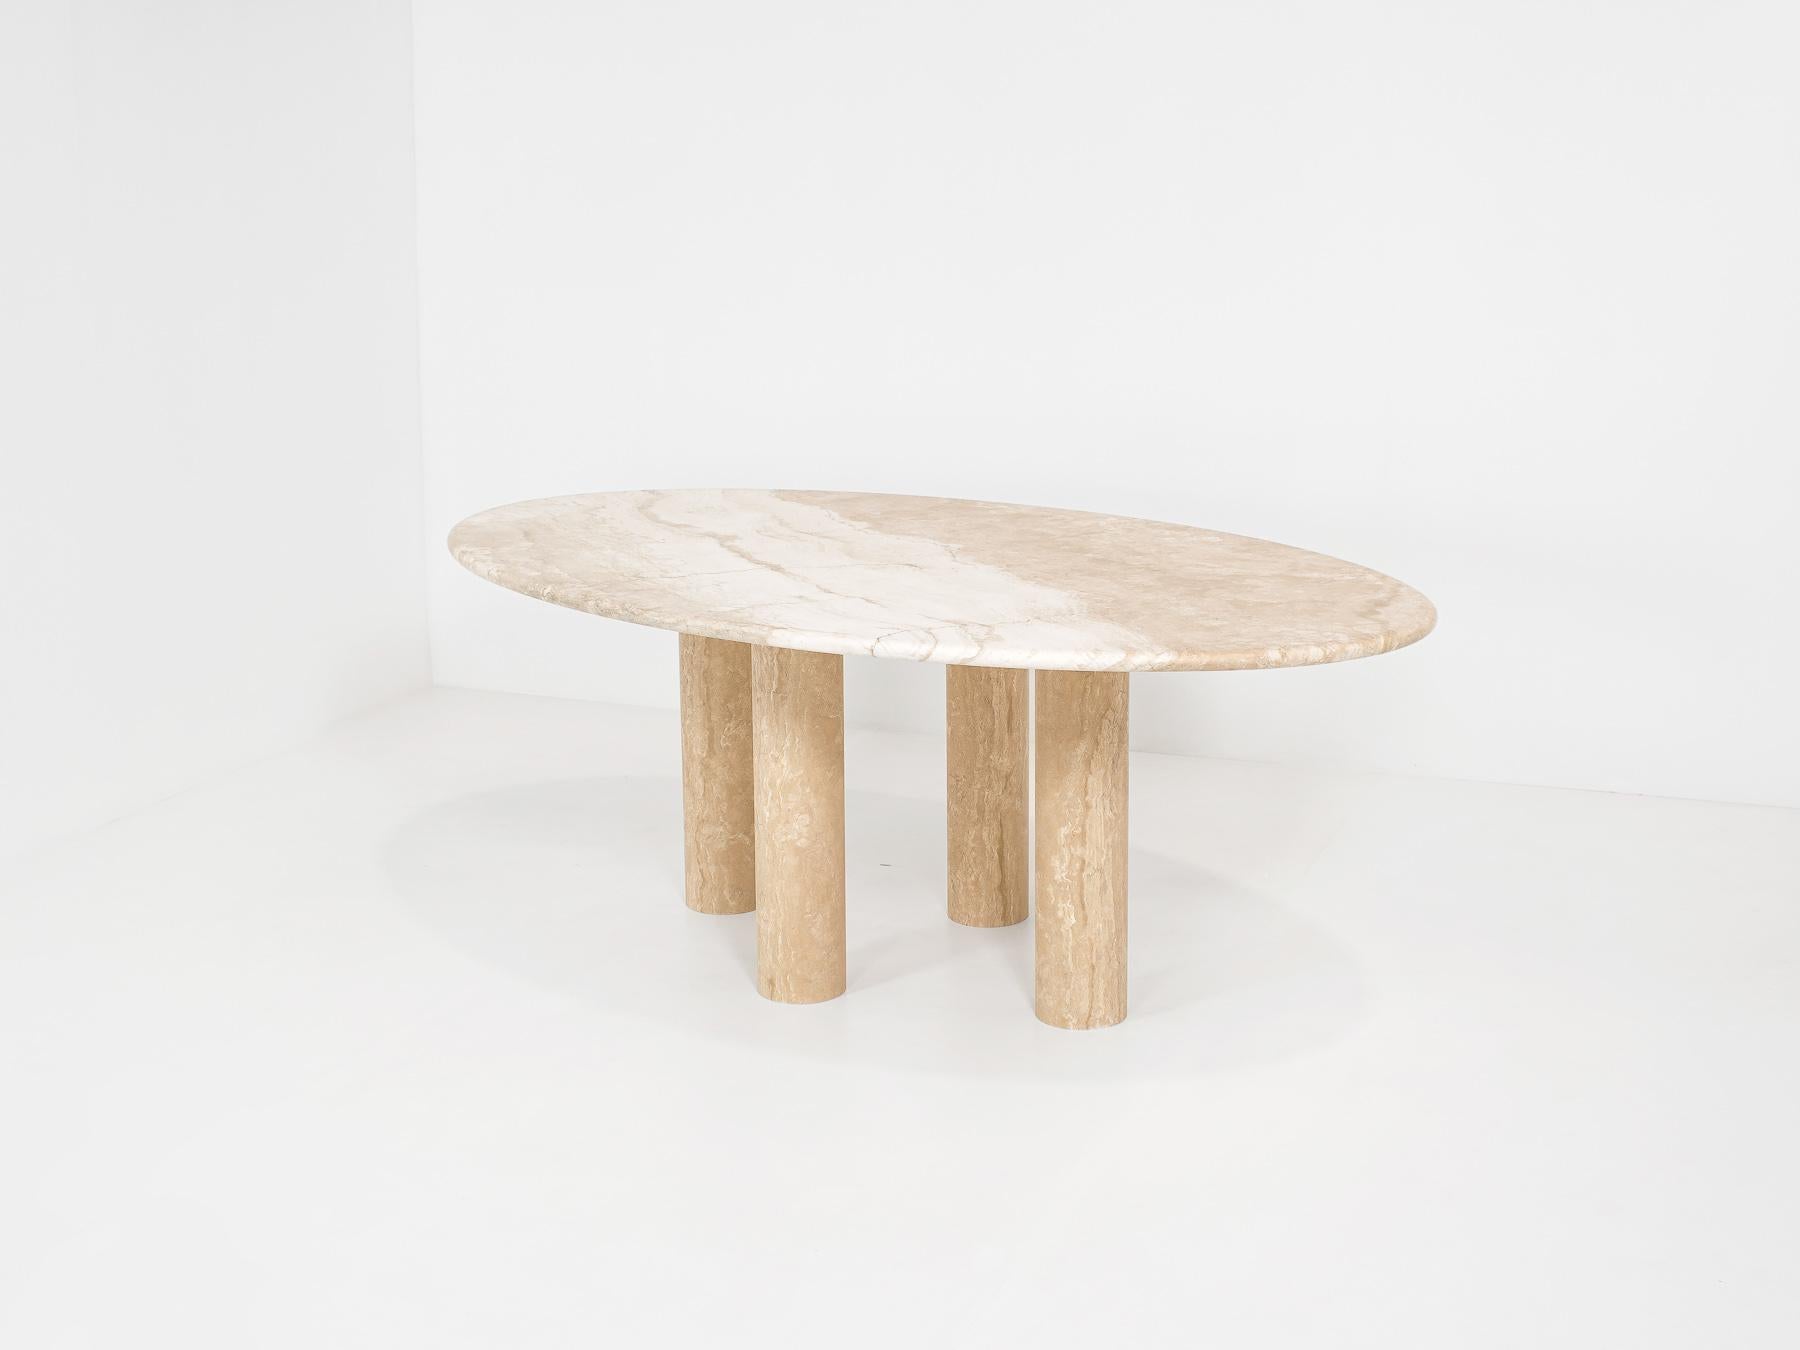 Large oval dining table, reminiscent of Mario Bellini’s “Il Colonnato”
The tabletop has a beautiful drawing. It has a polished look. 
The column legs can be arranged according to your preference (wide or centered).

It seats 6-8 people.

The